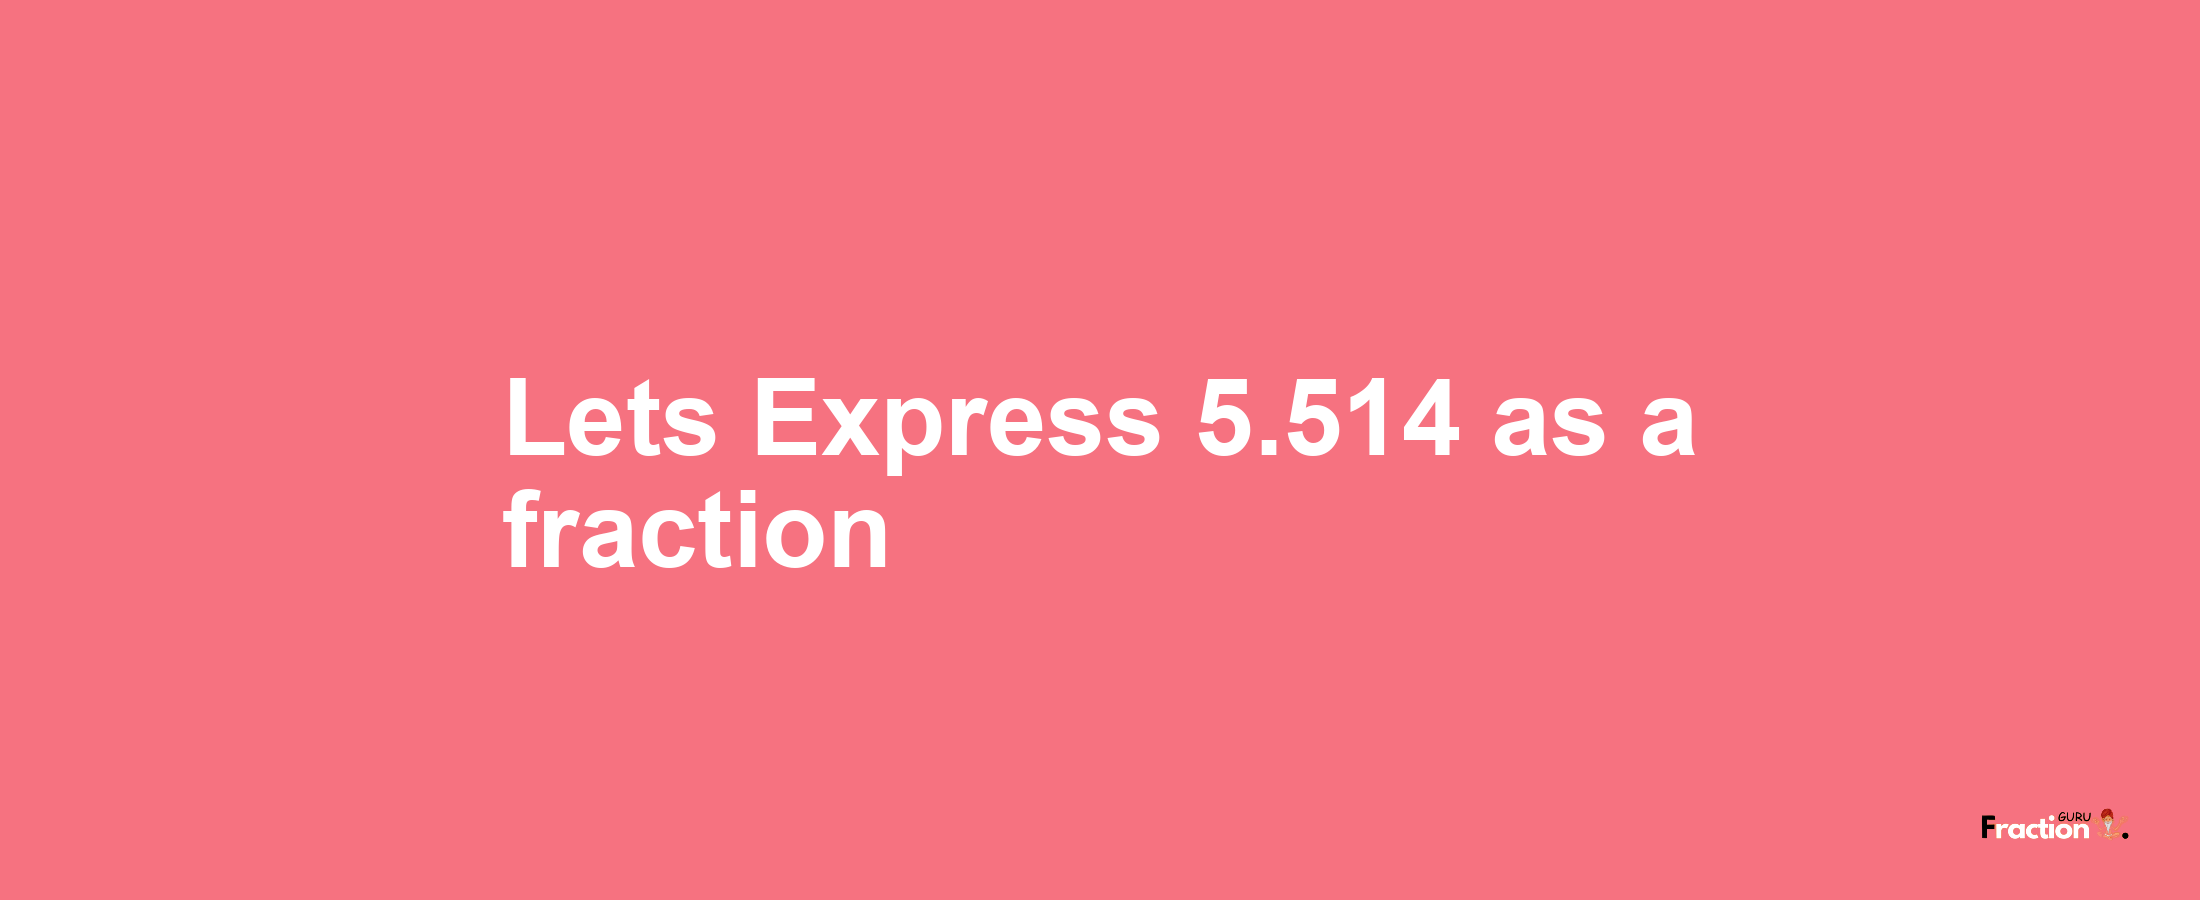 Lets Express 5.514 as afraction